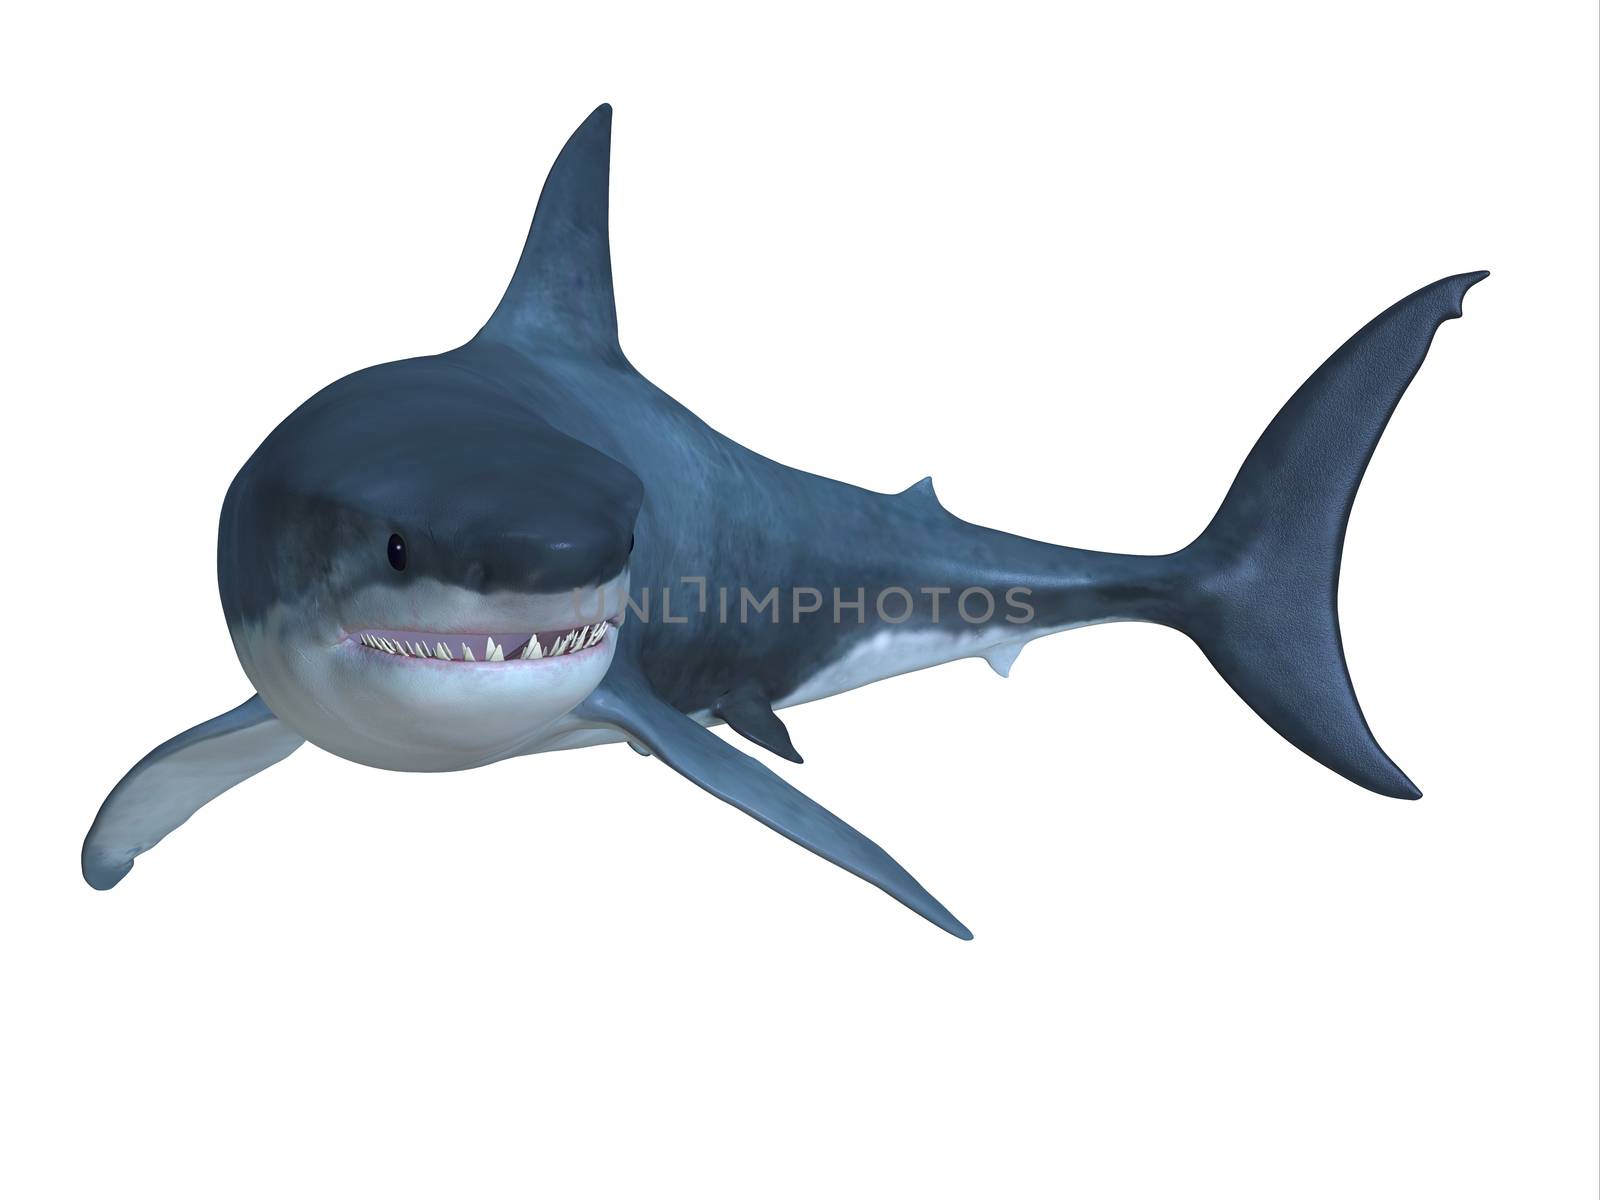 The Great White shark can be found in worldwide oceans and can live up to 70 years.